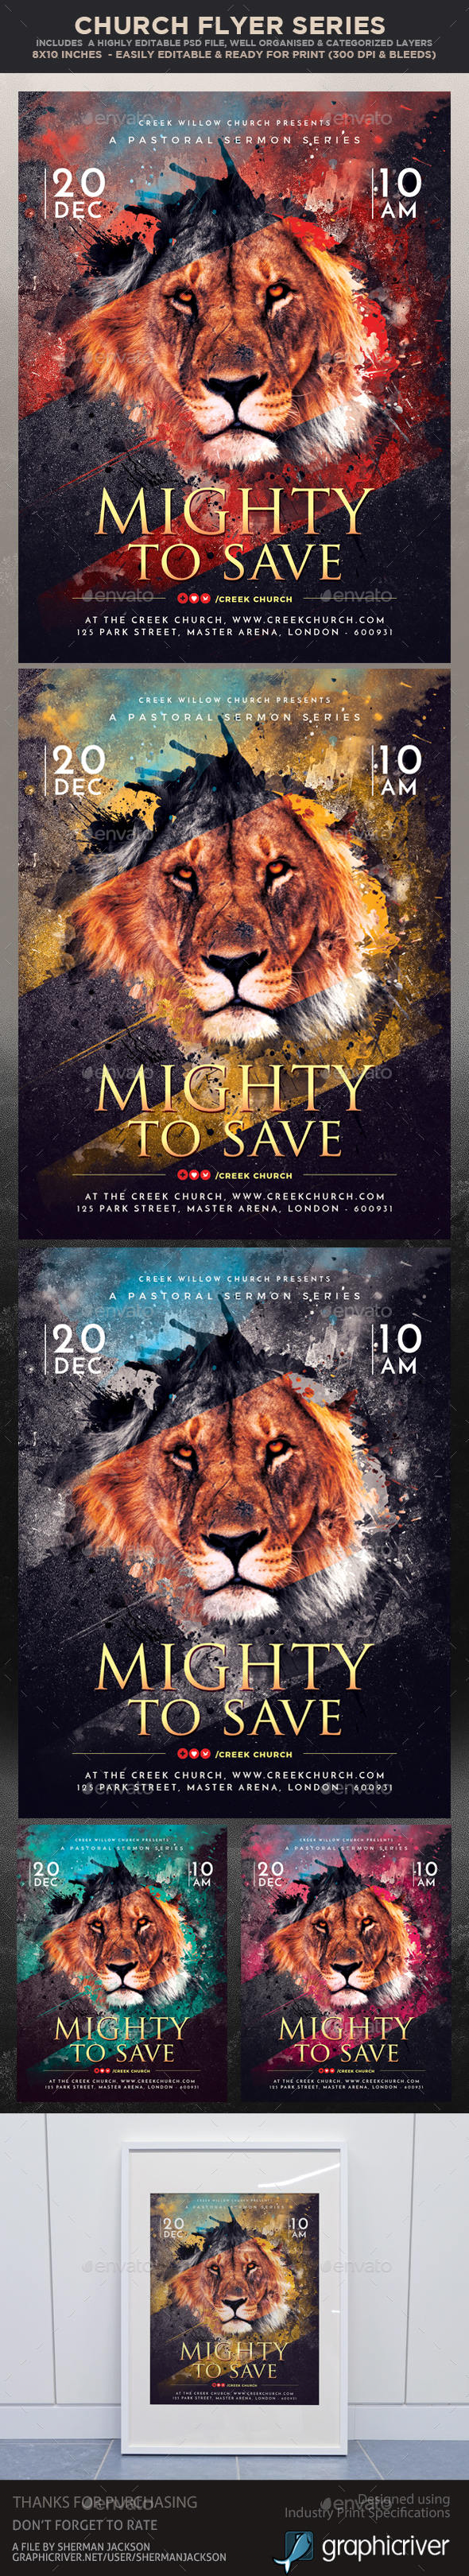 Church Themed Event Flyer - Mighty to Save